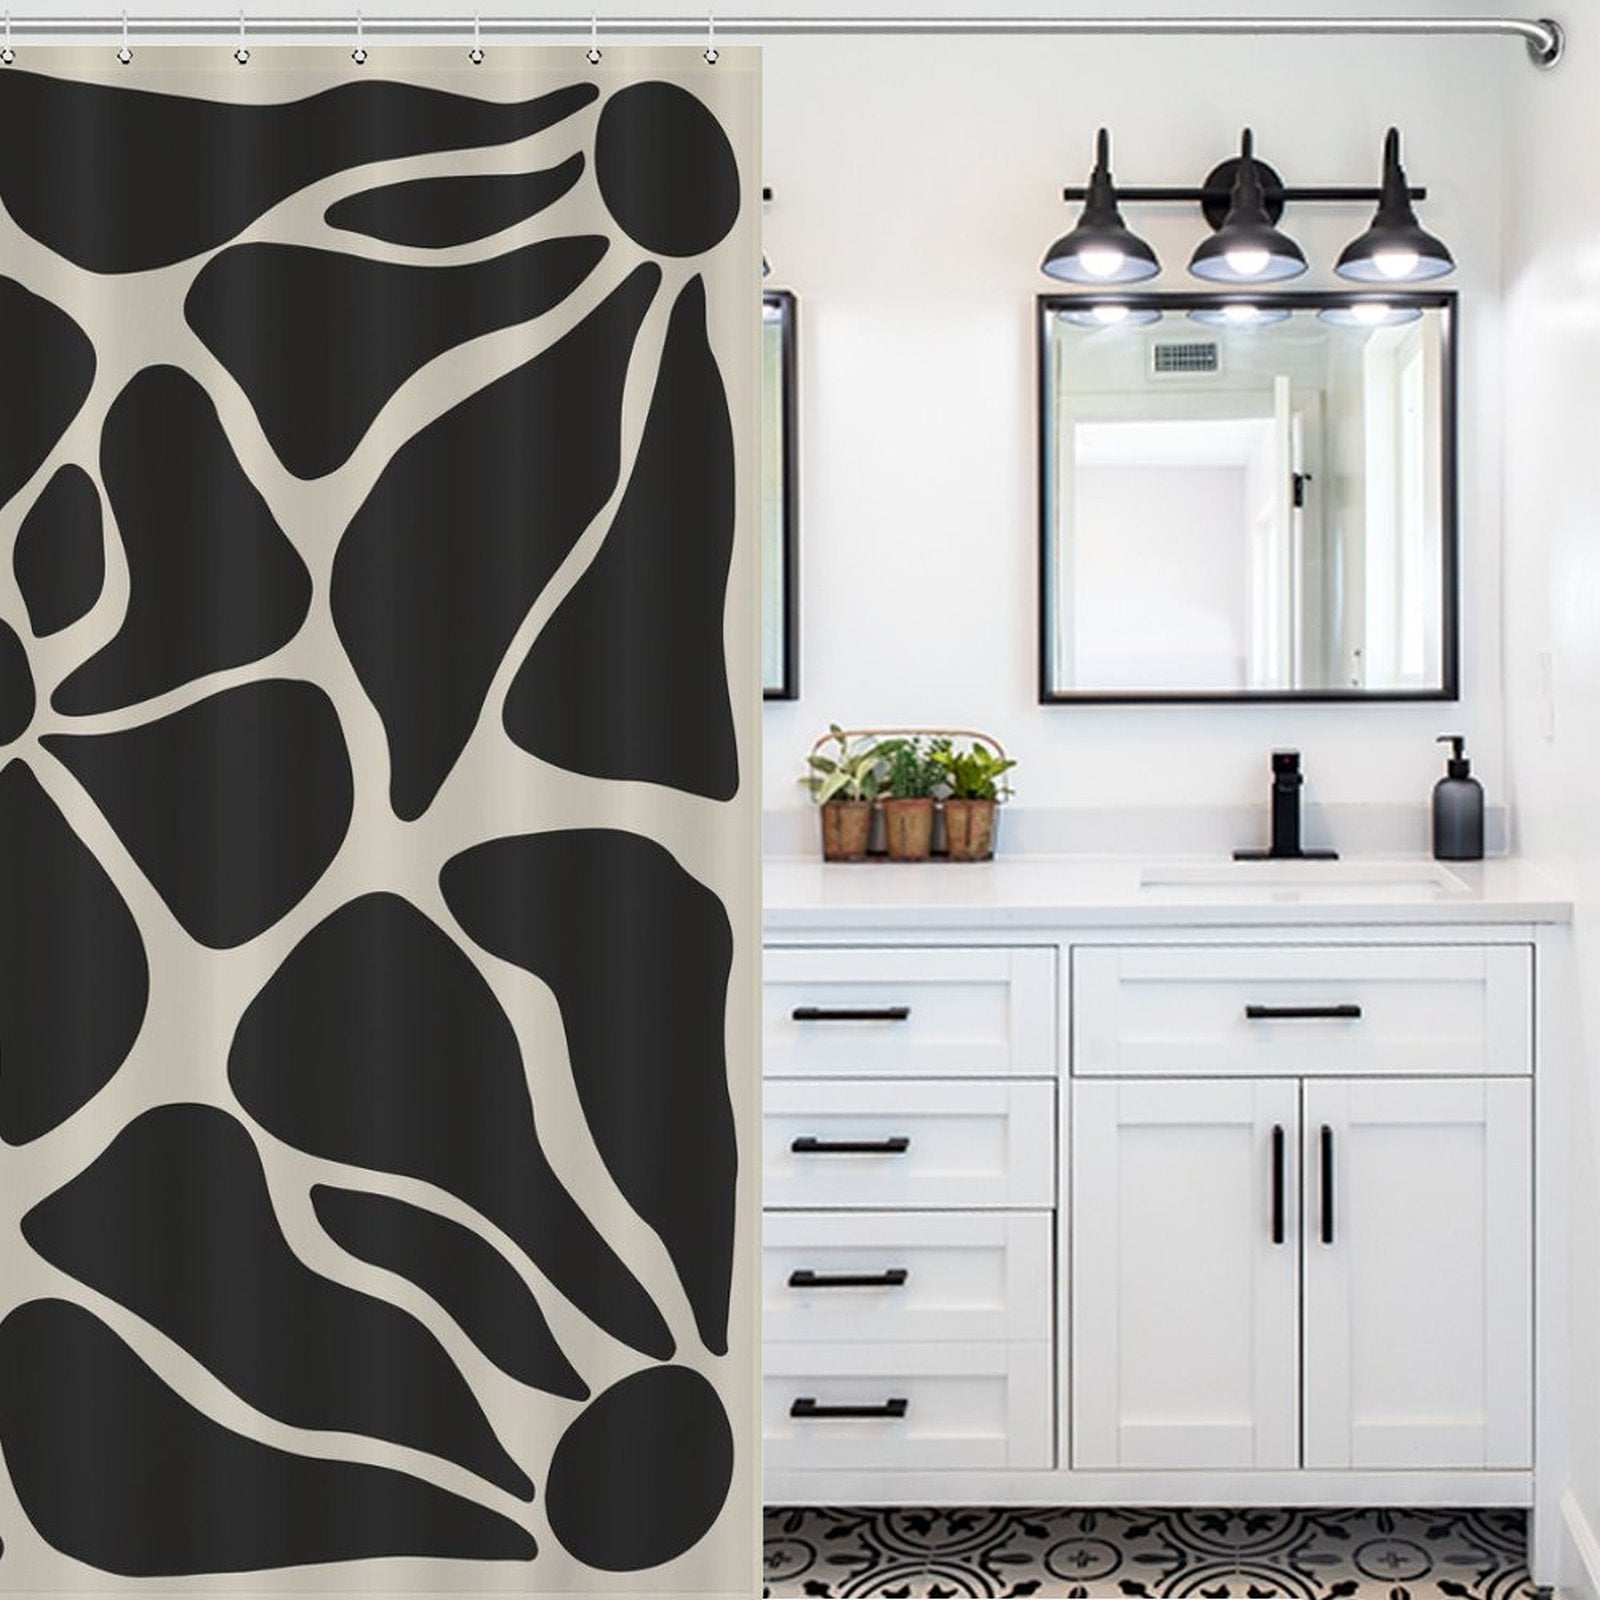 A bathroom with a white vanity, double mirrors, and a patterned floor. The Cotton Cat Vintage Boho Flower Black and Grey Art 70s Black Floral Mid Century Abstract Shower Curtain-Cottoncat boasts an elegant black-and-white design, tying together the stylish space.